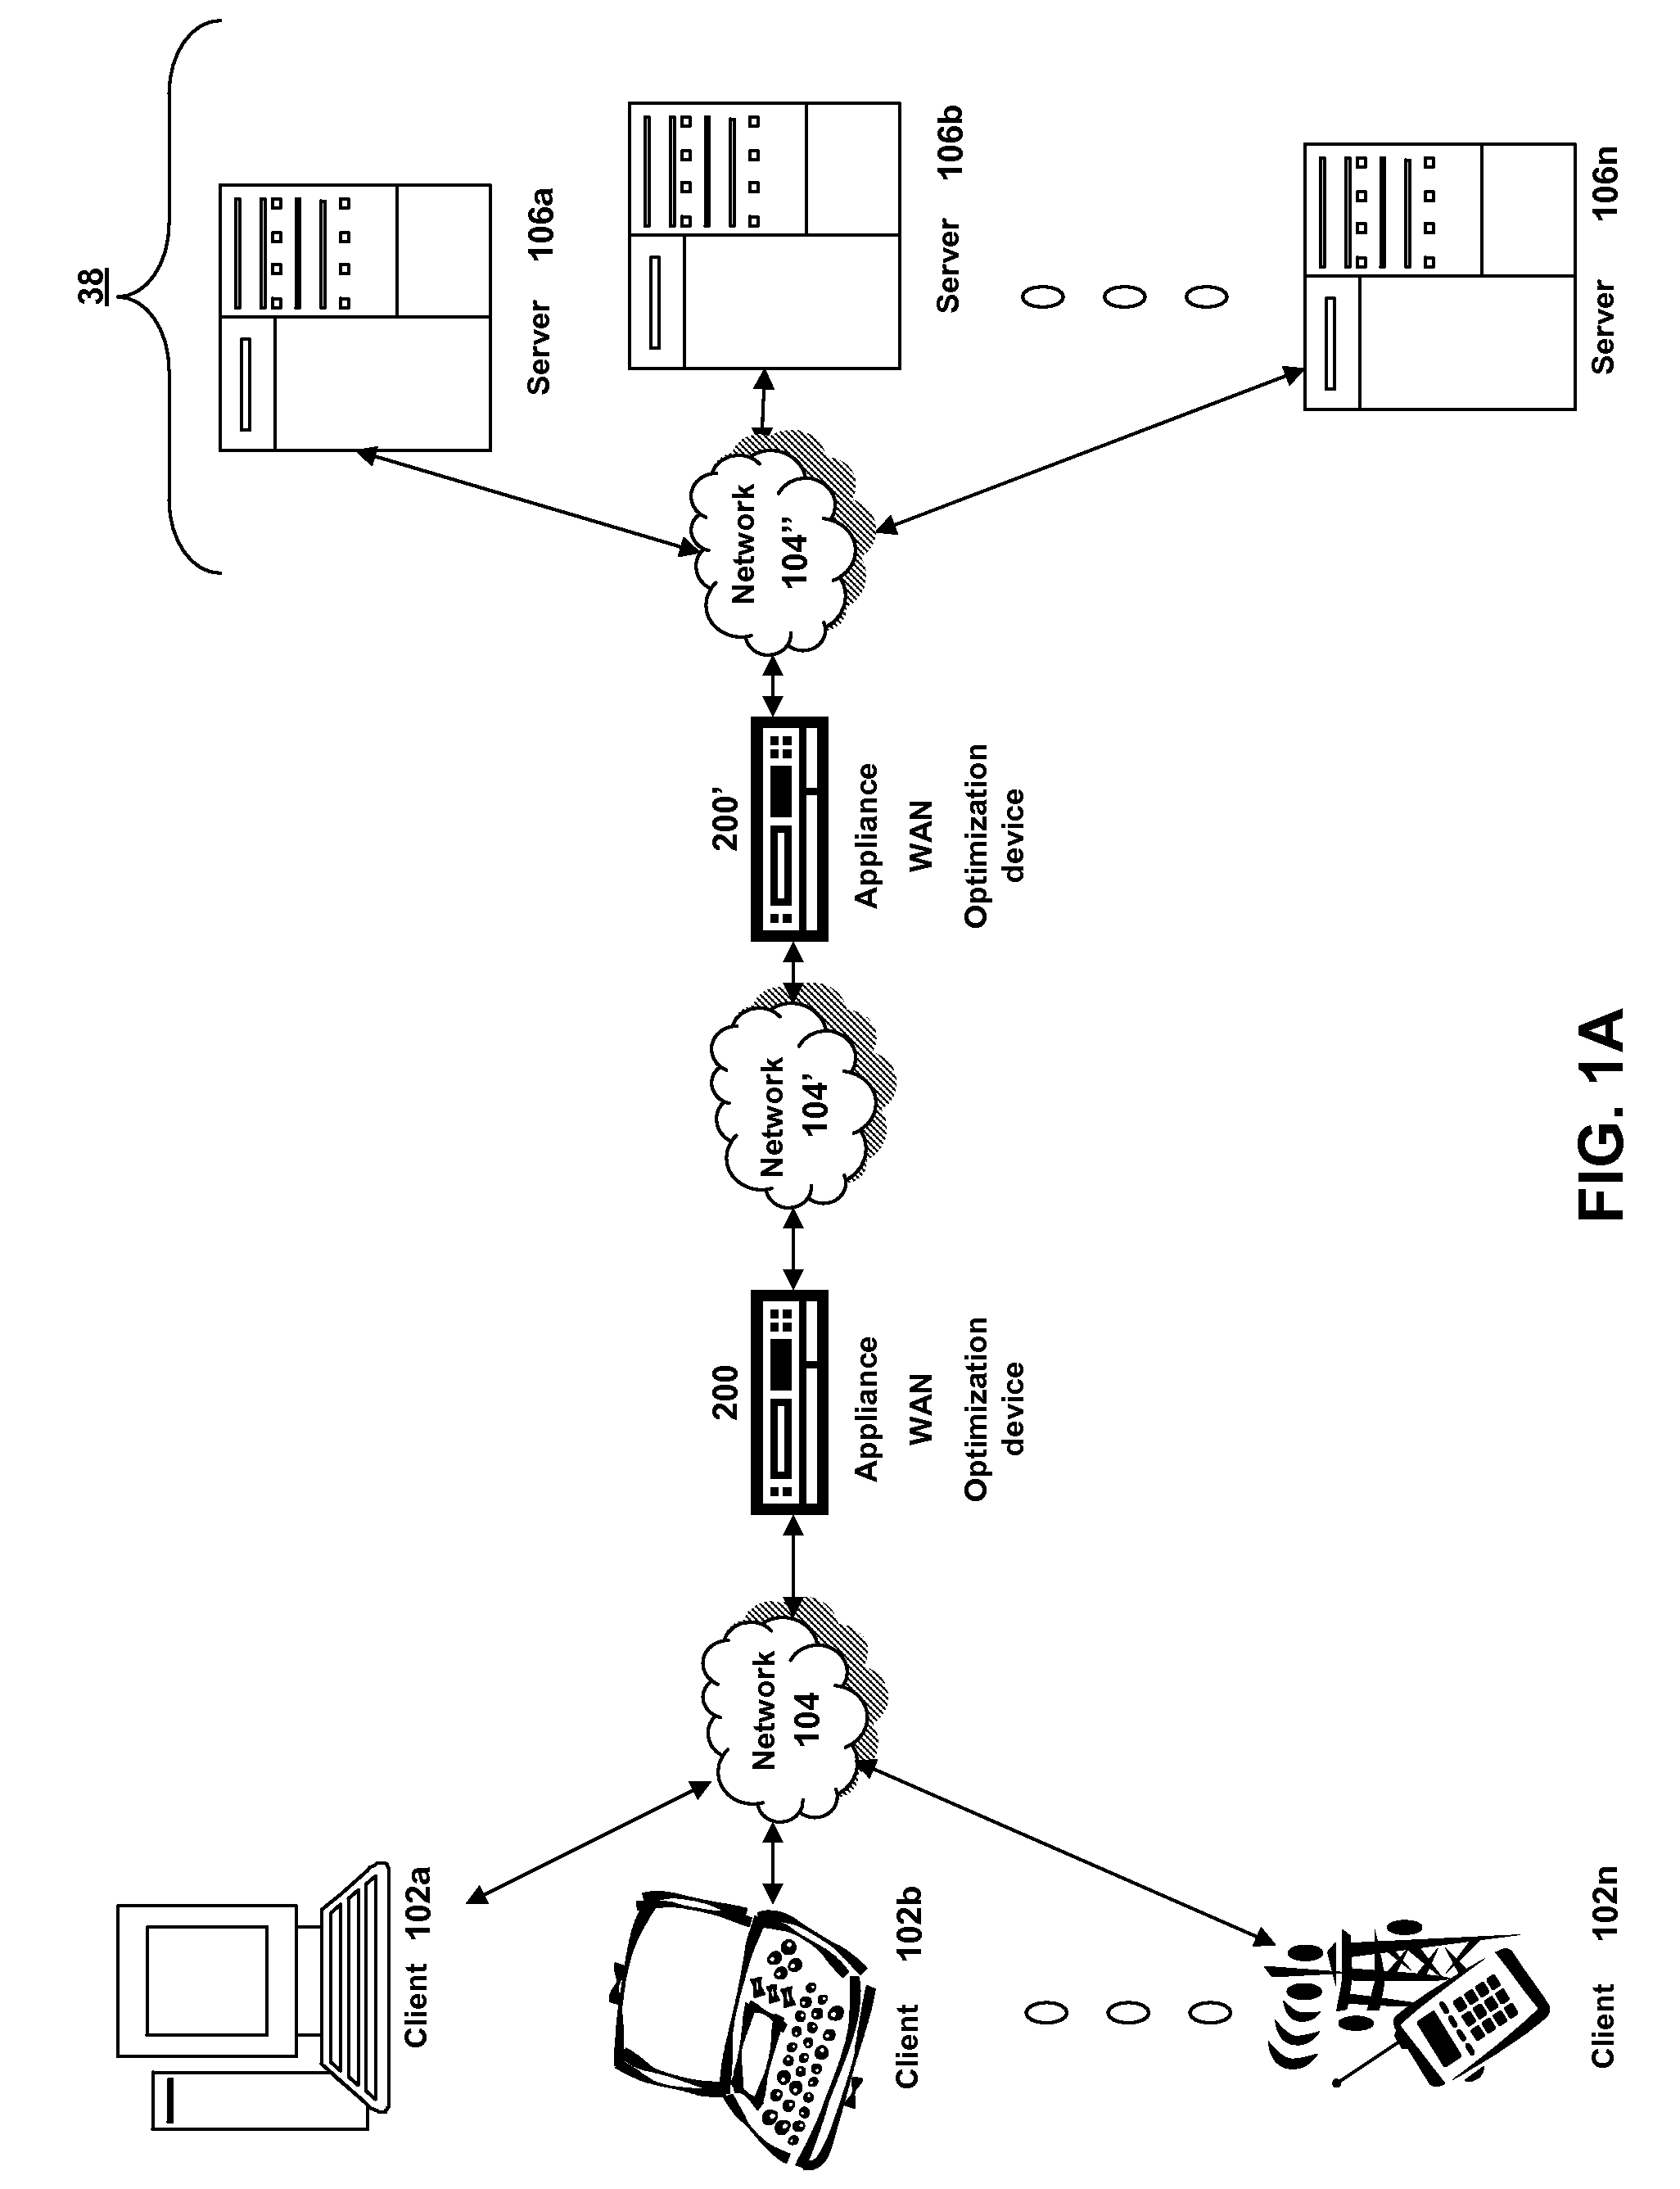 Systems and methods of providing a multi-tier cache